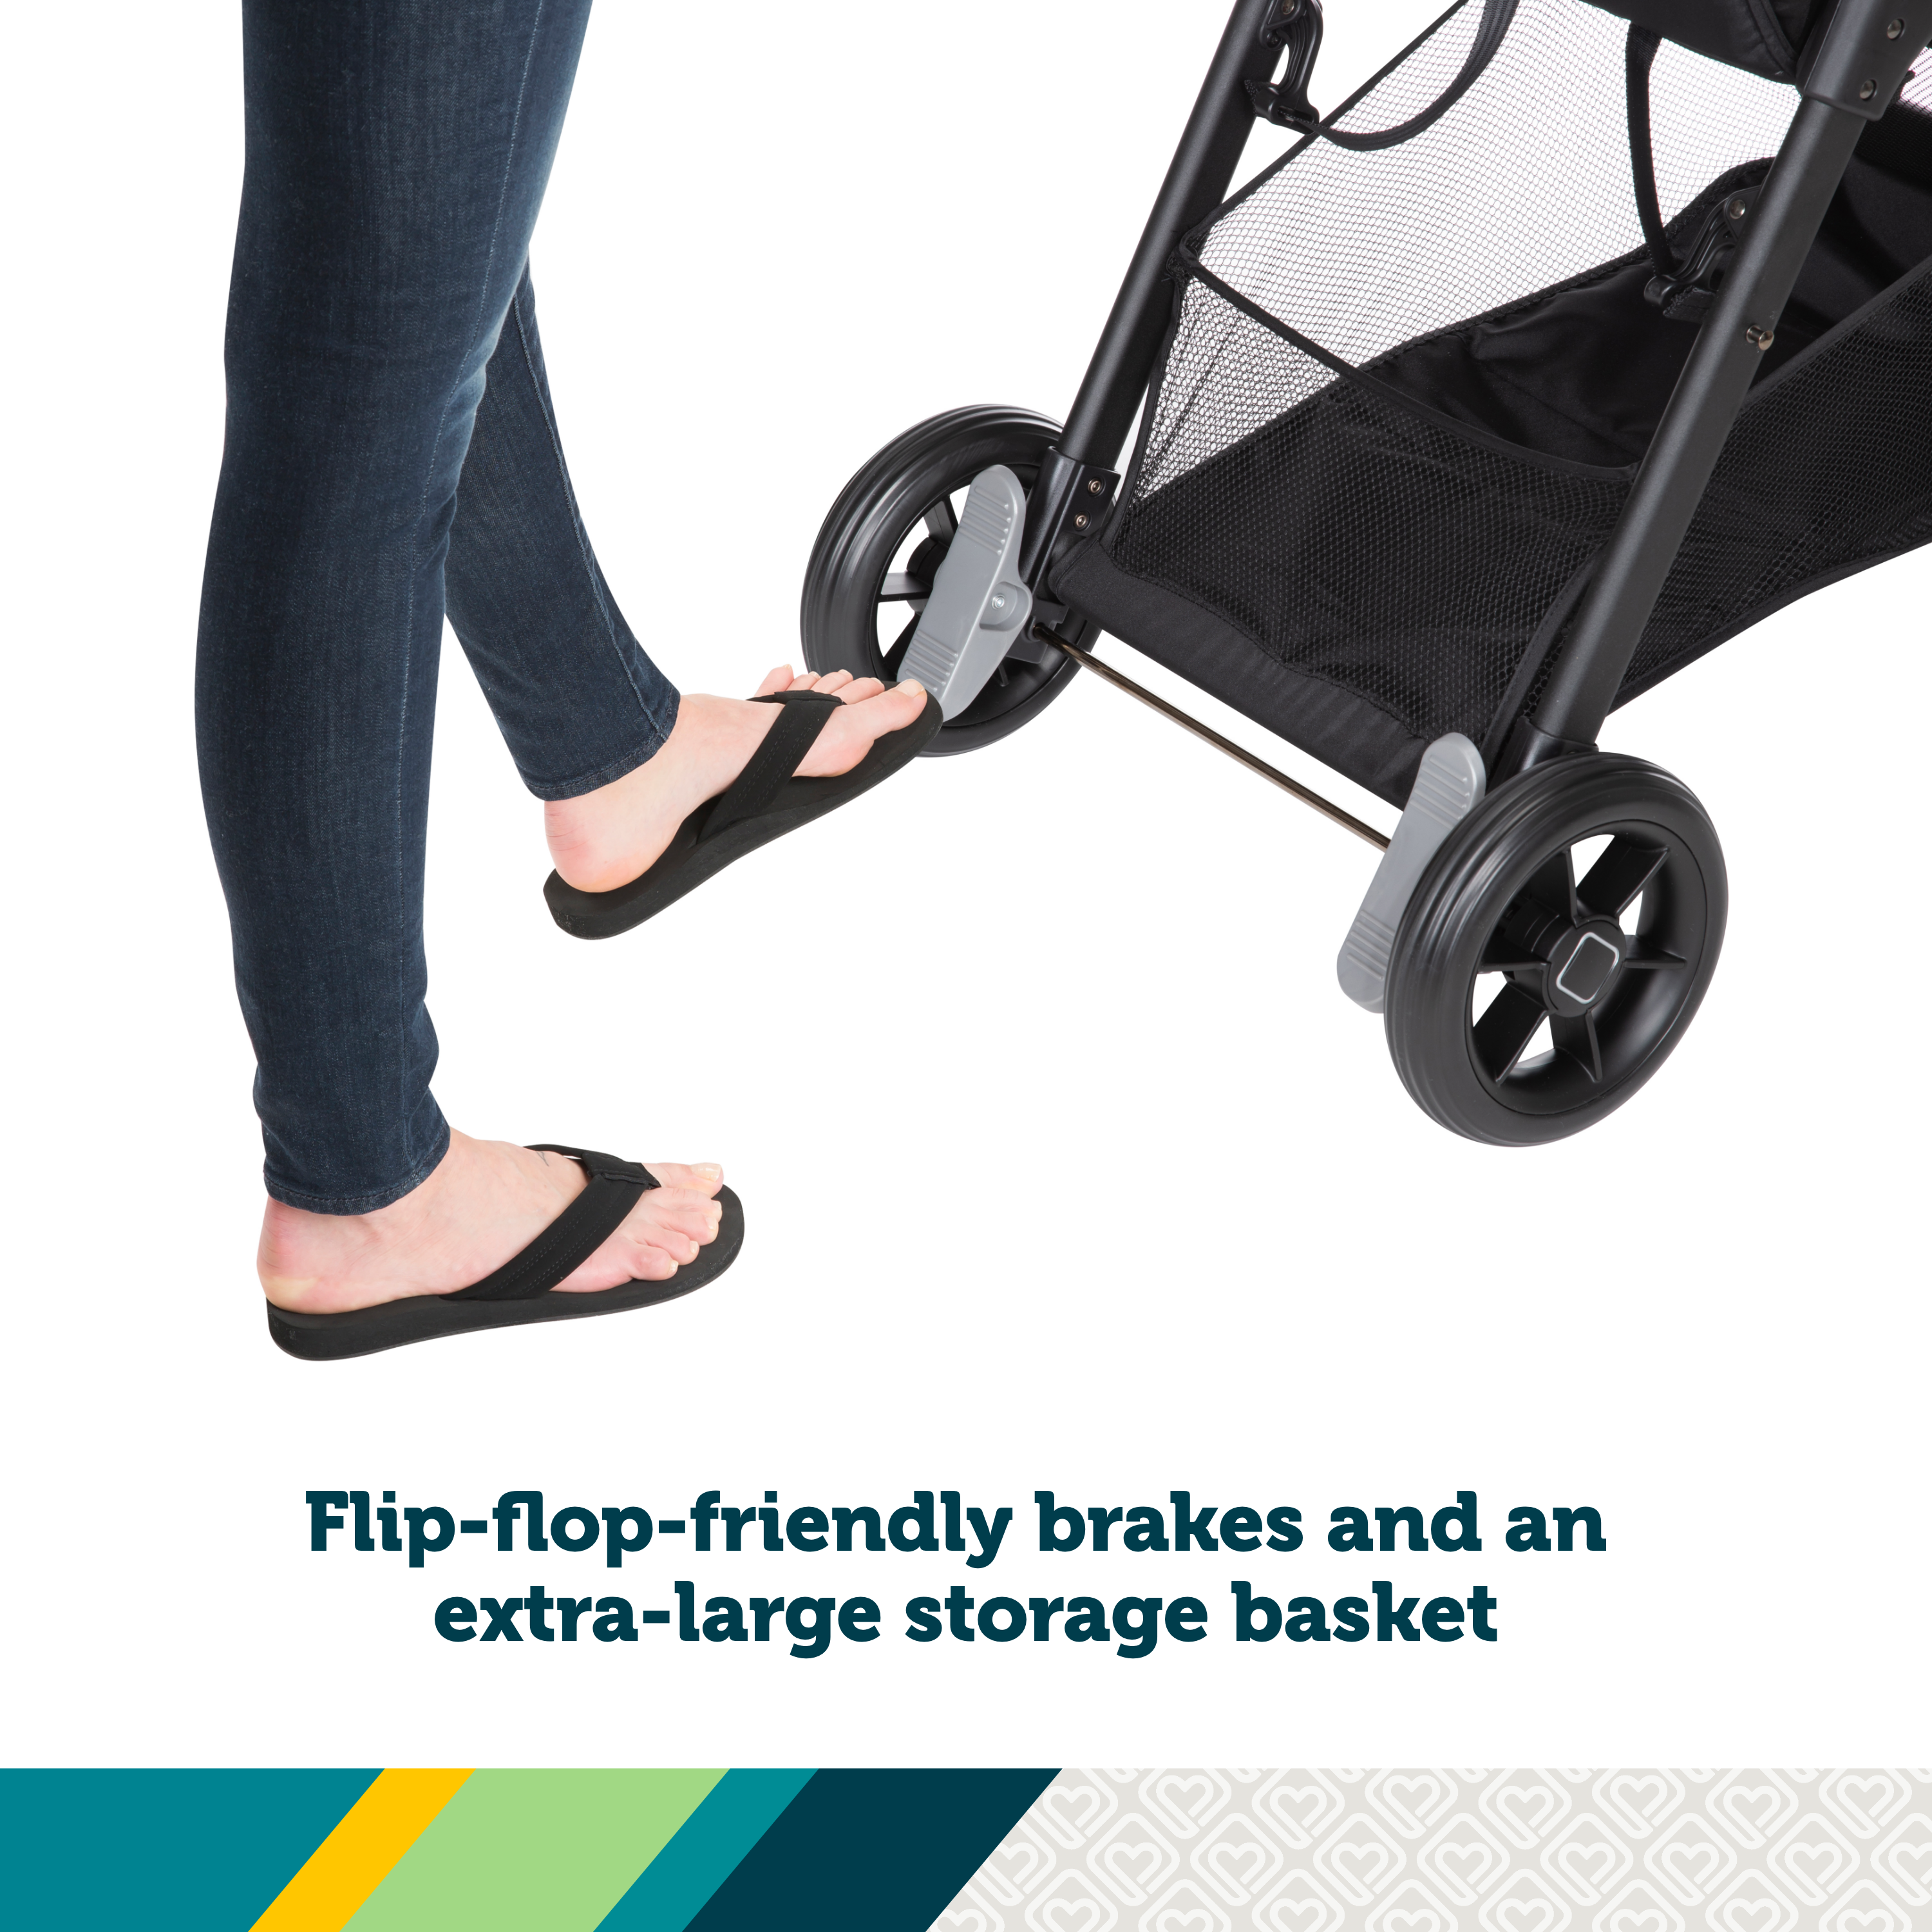 Smooth Ride Travel System - flip-flop-friendly brakes and an extra-large storage basket